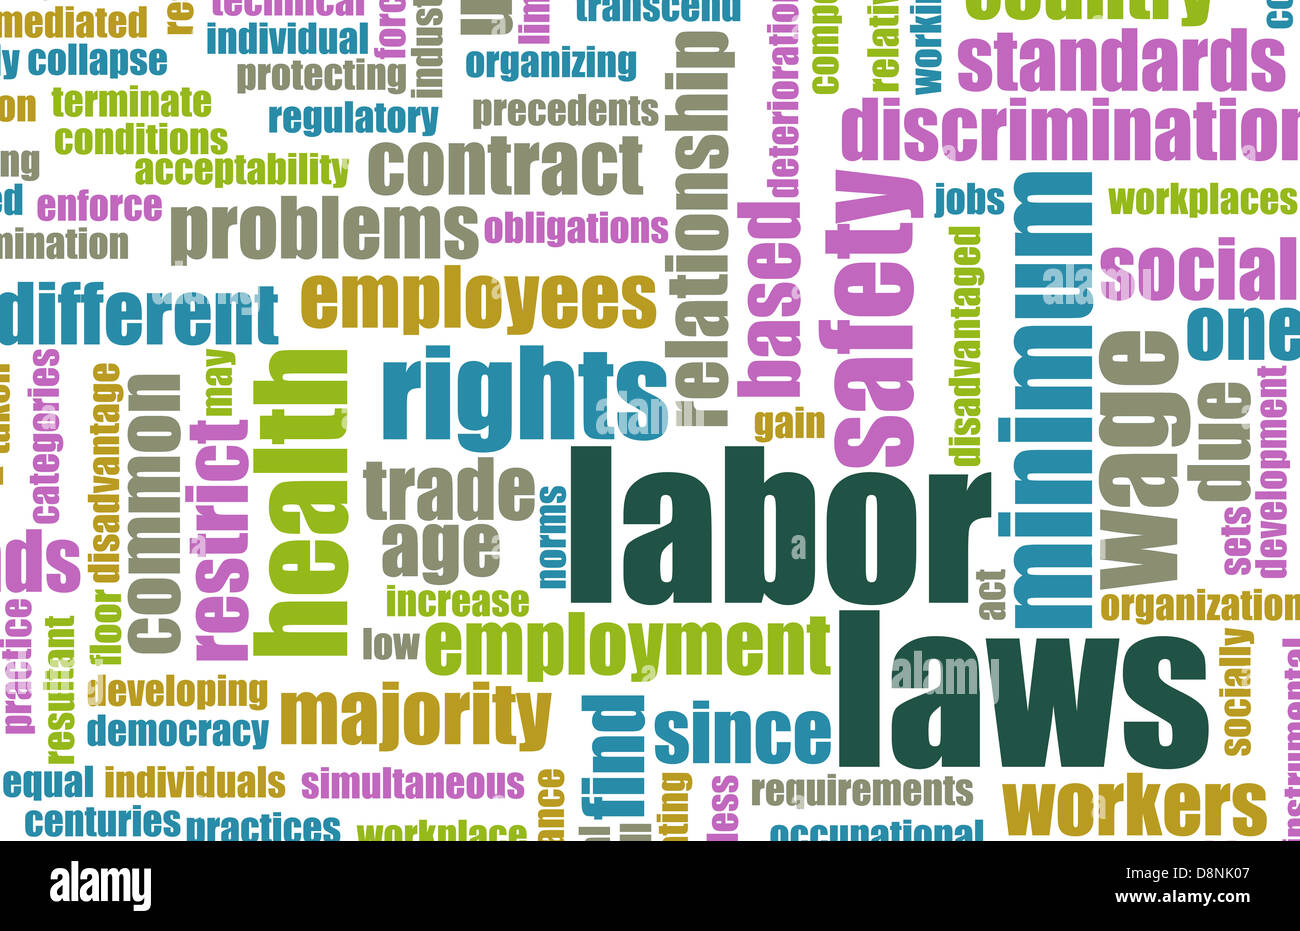 Labor Laws in the Workplace as Concept Stock Photo